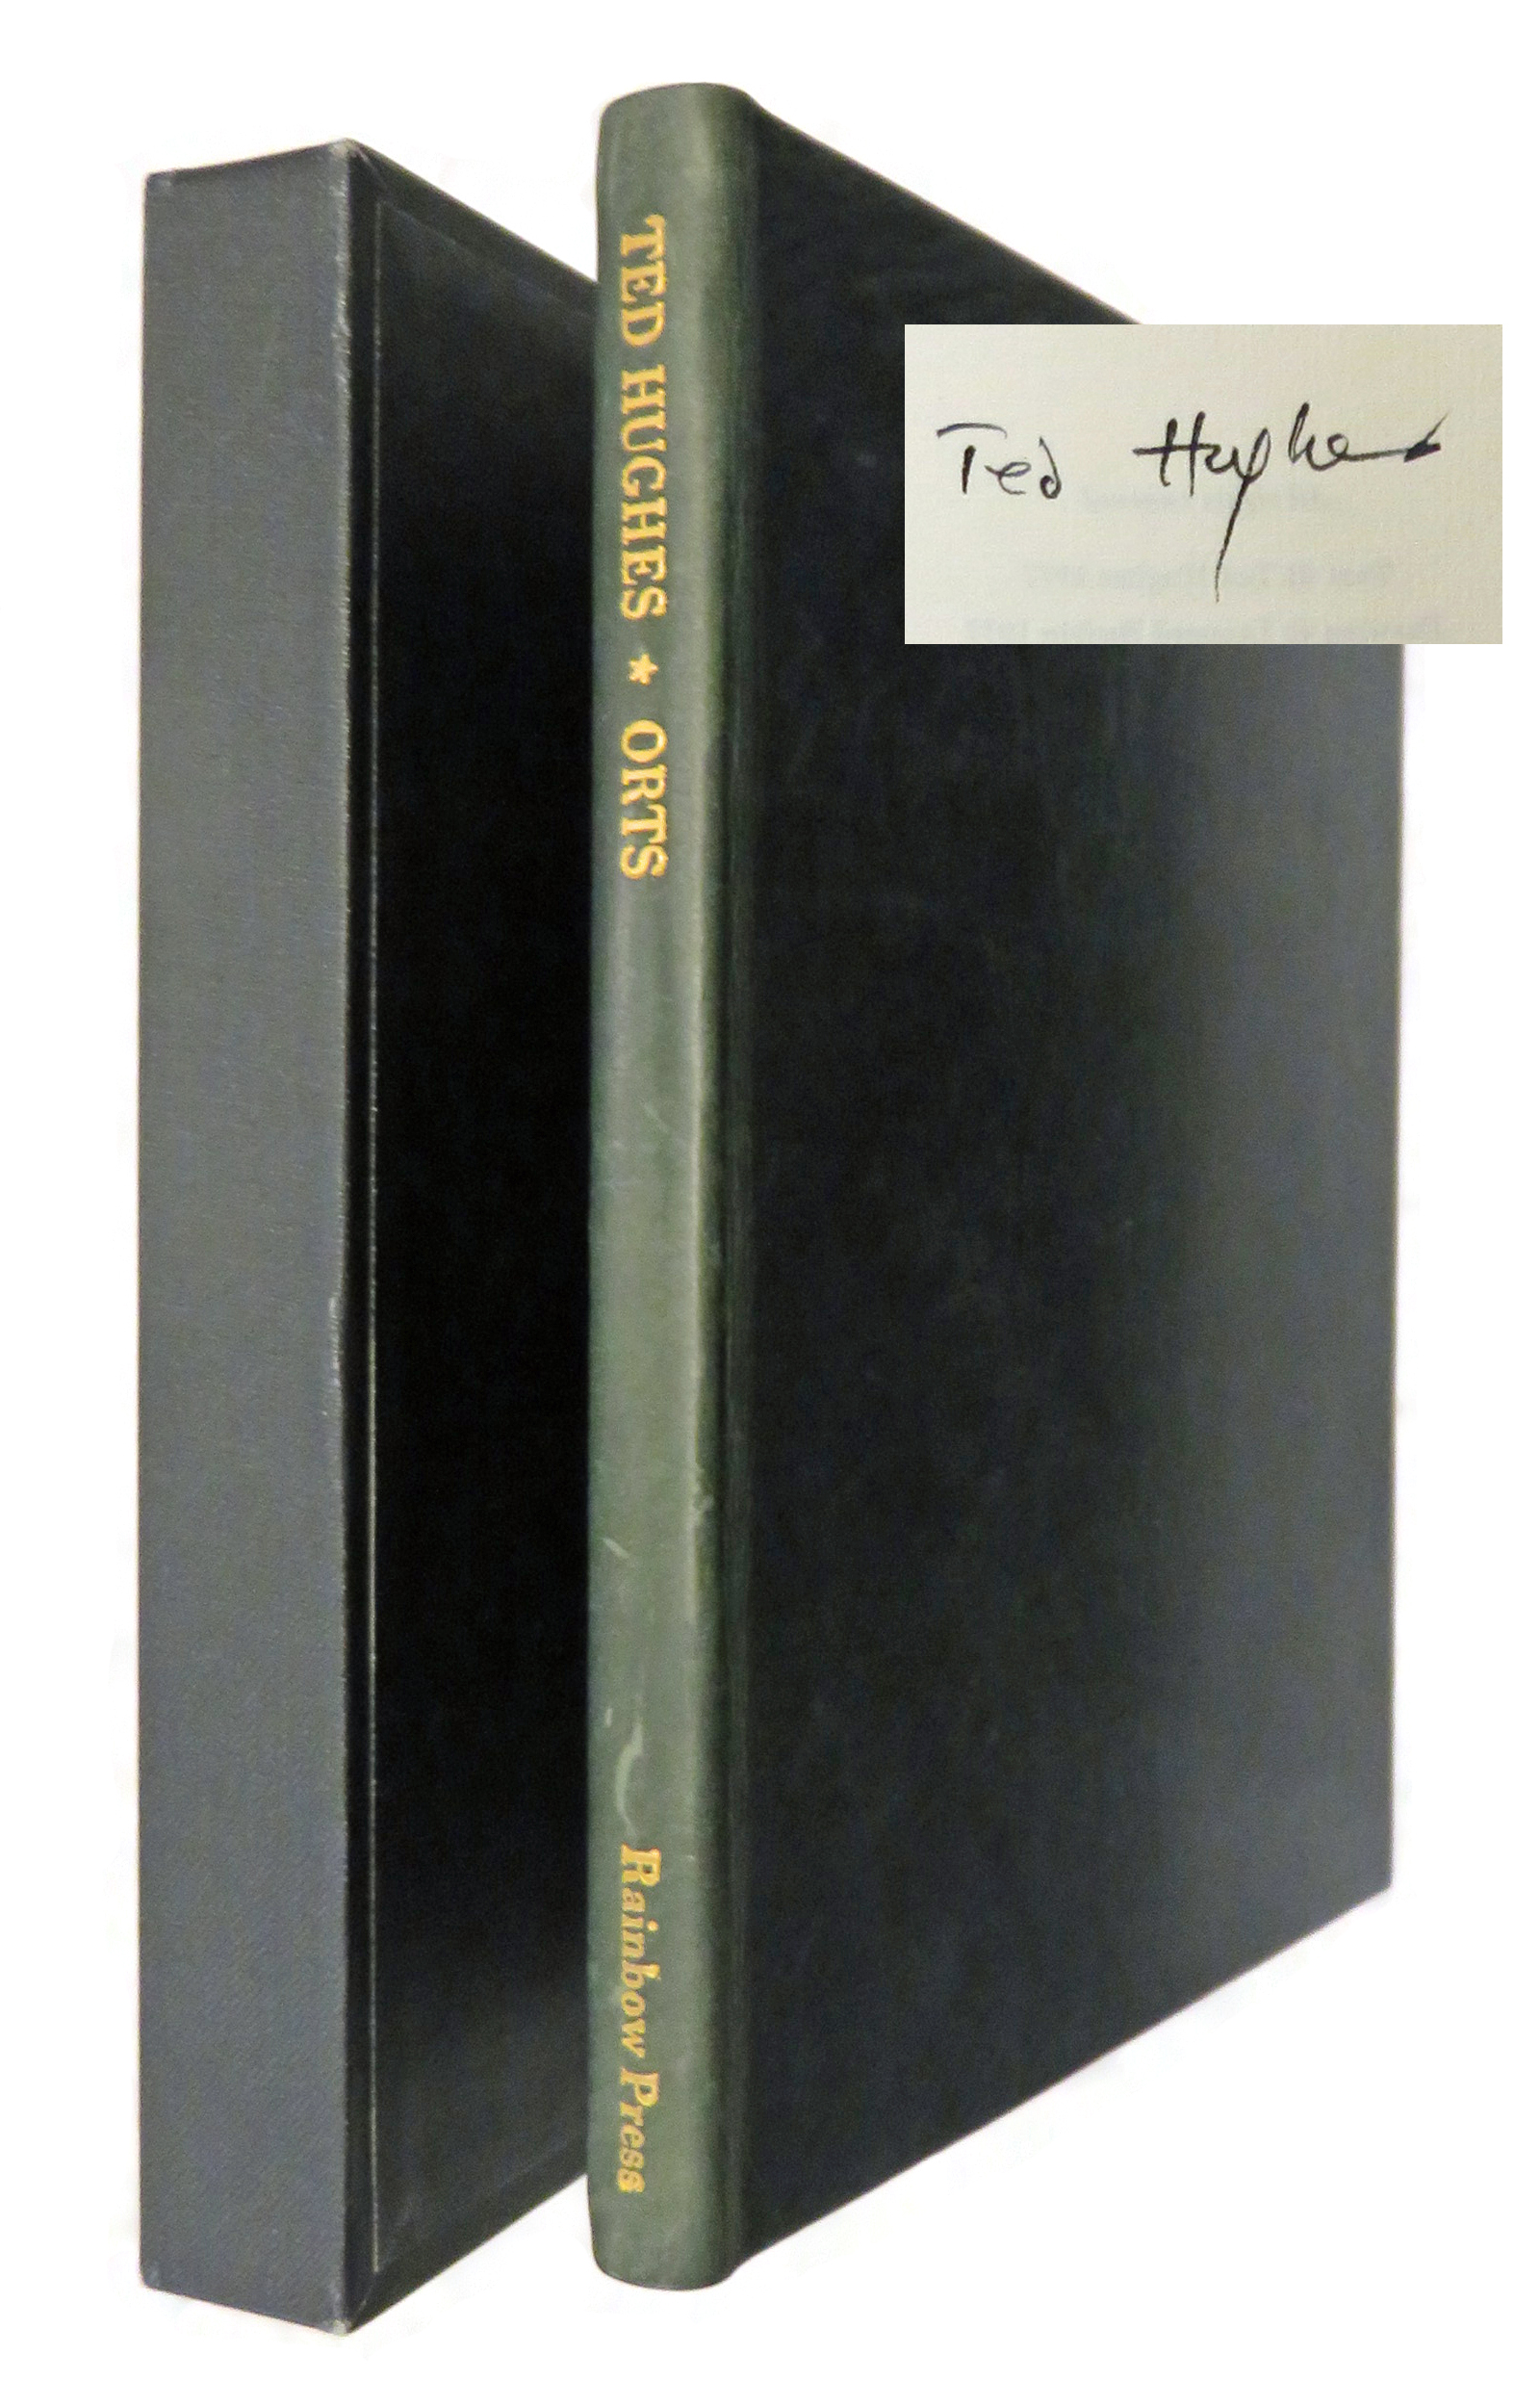 Orts Signed by Ted Hughes